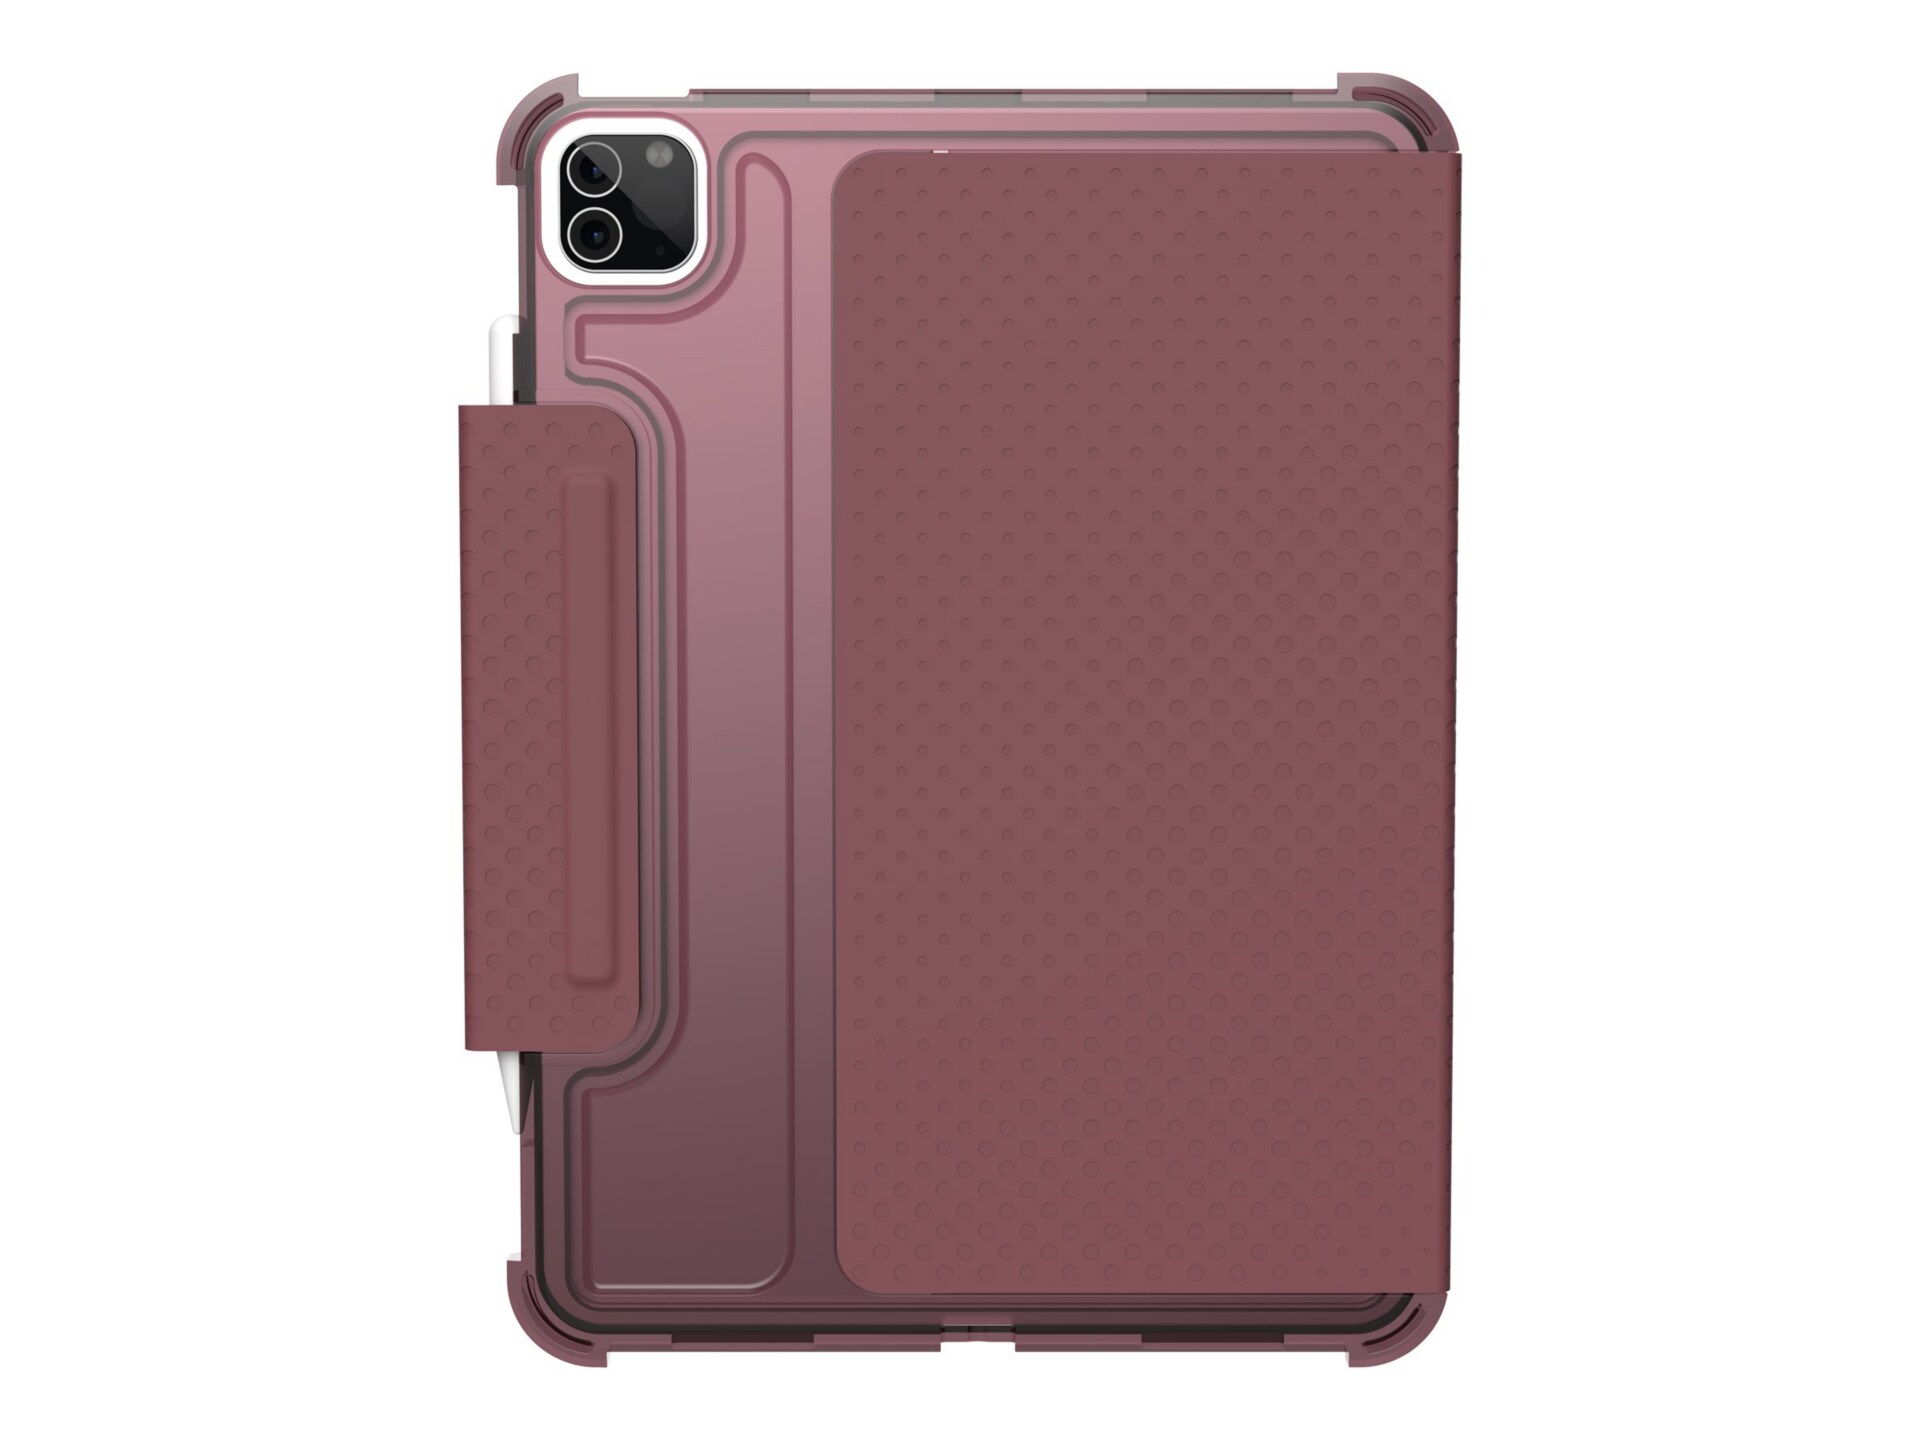 [U] Case for iPad Pro 11-in (3rd Gen, 2021) - Lucent Aubergine/Dusty Rose -